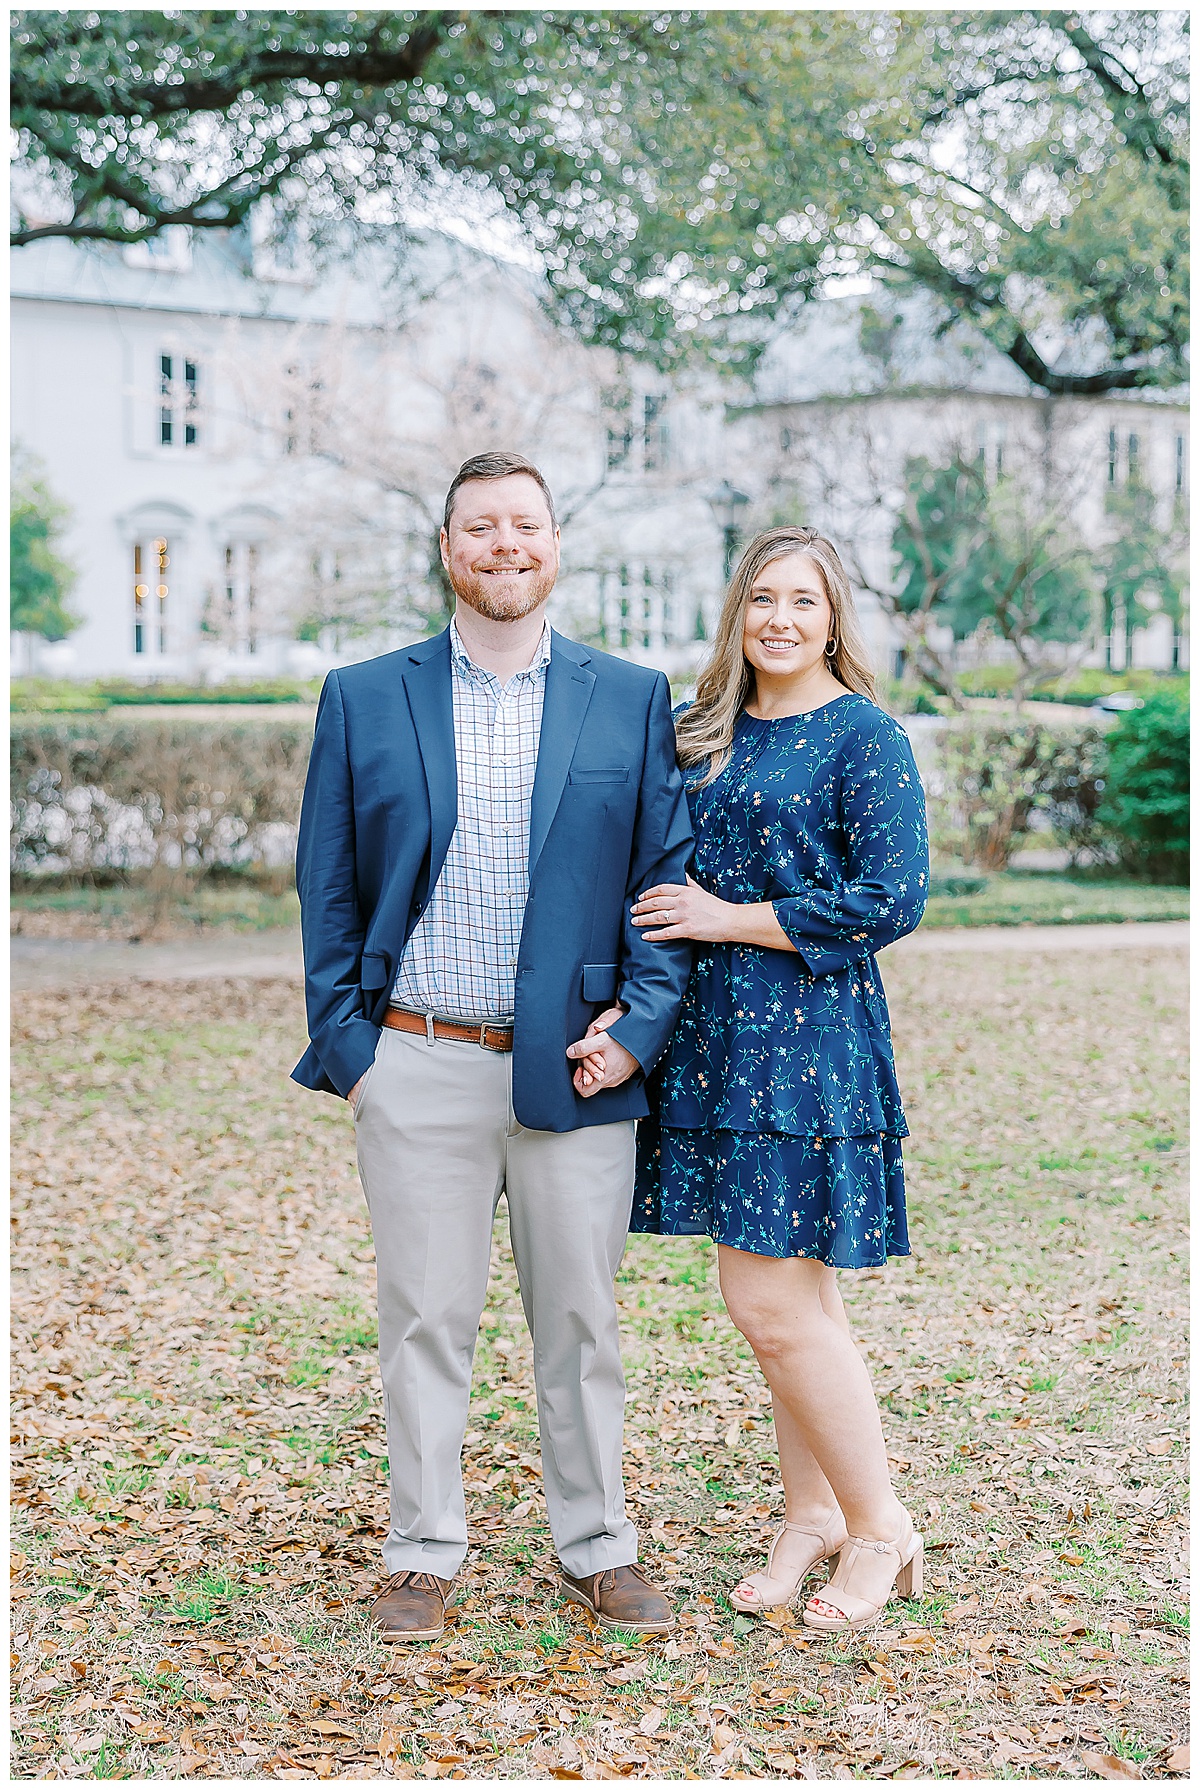 flippen park engagement, flippen park engagement session, dallas engagement session, dallas engagement photographer, dallas wedding photographer, brides of north texas, engagement photos